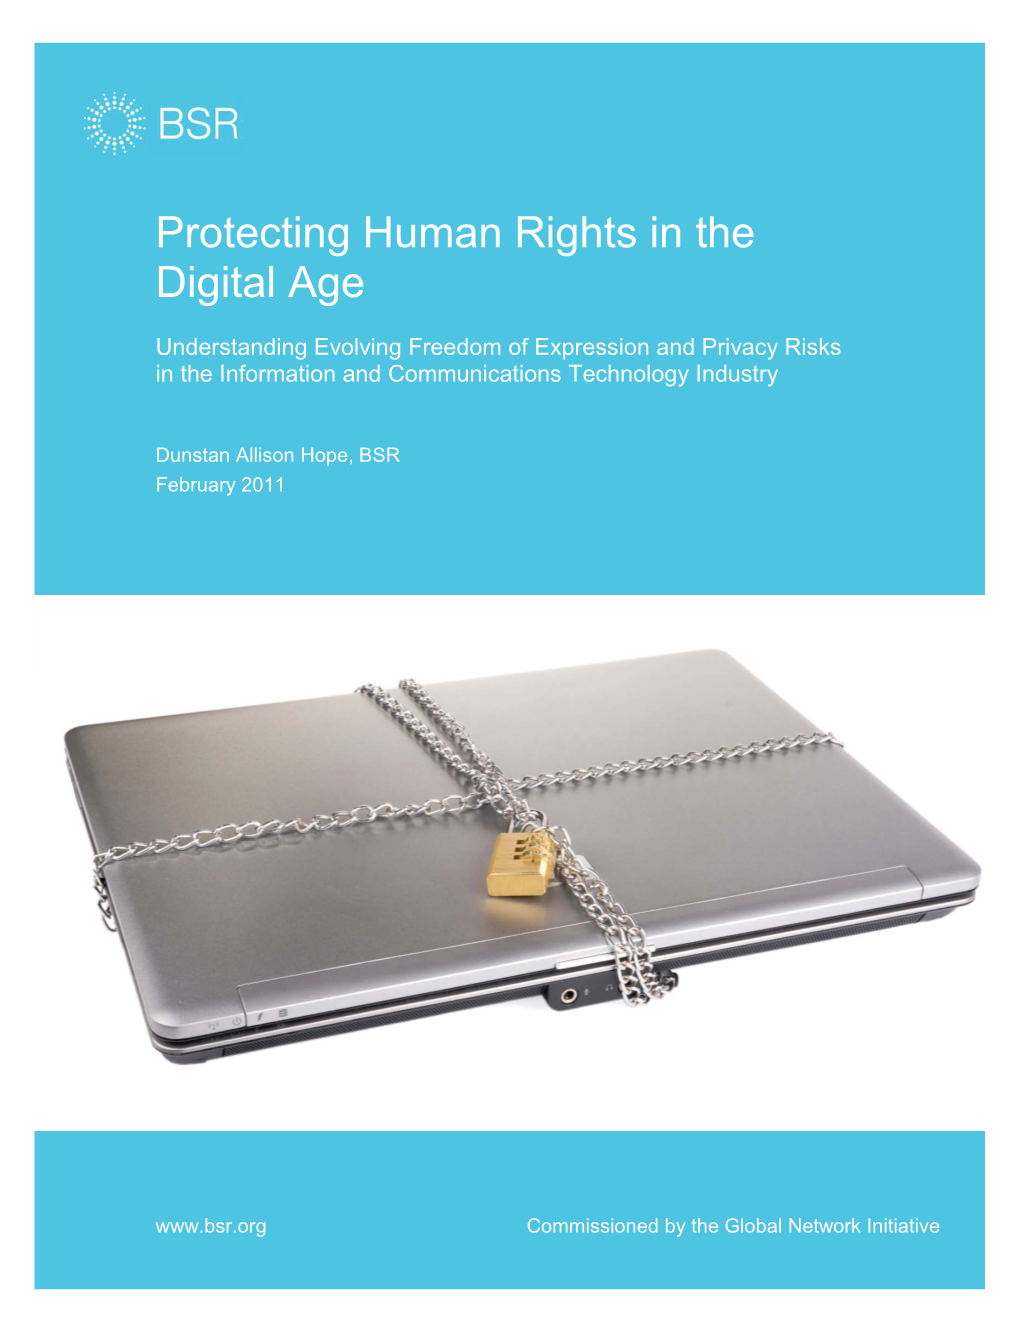 Protecting Human Rights in the Digital Age